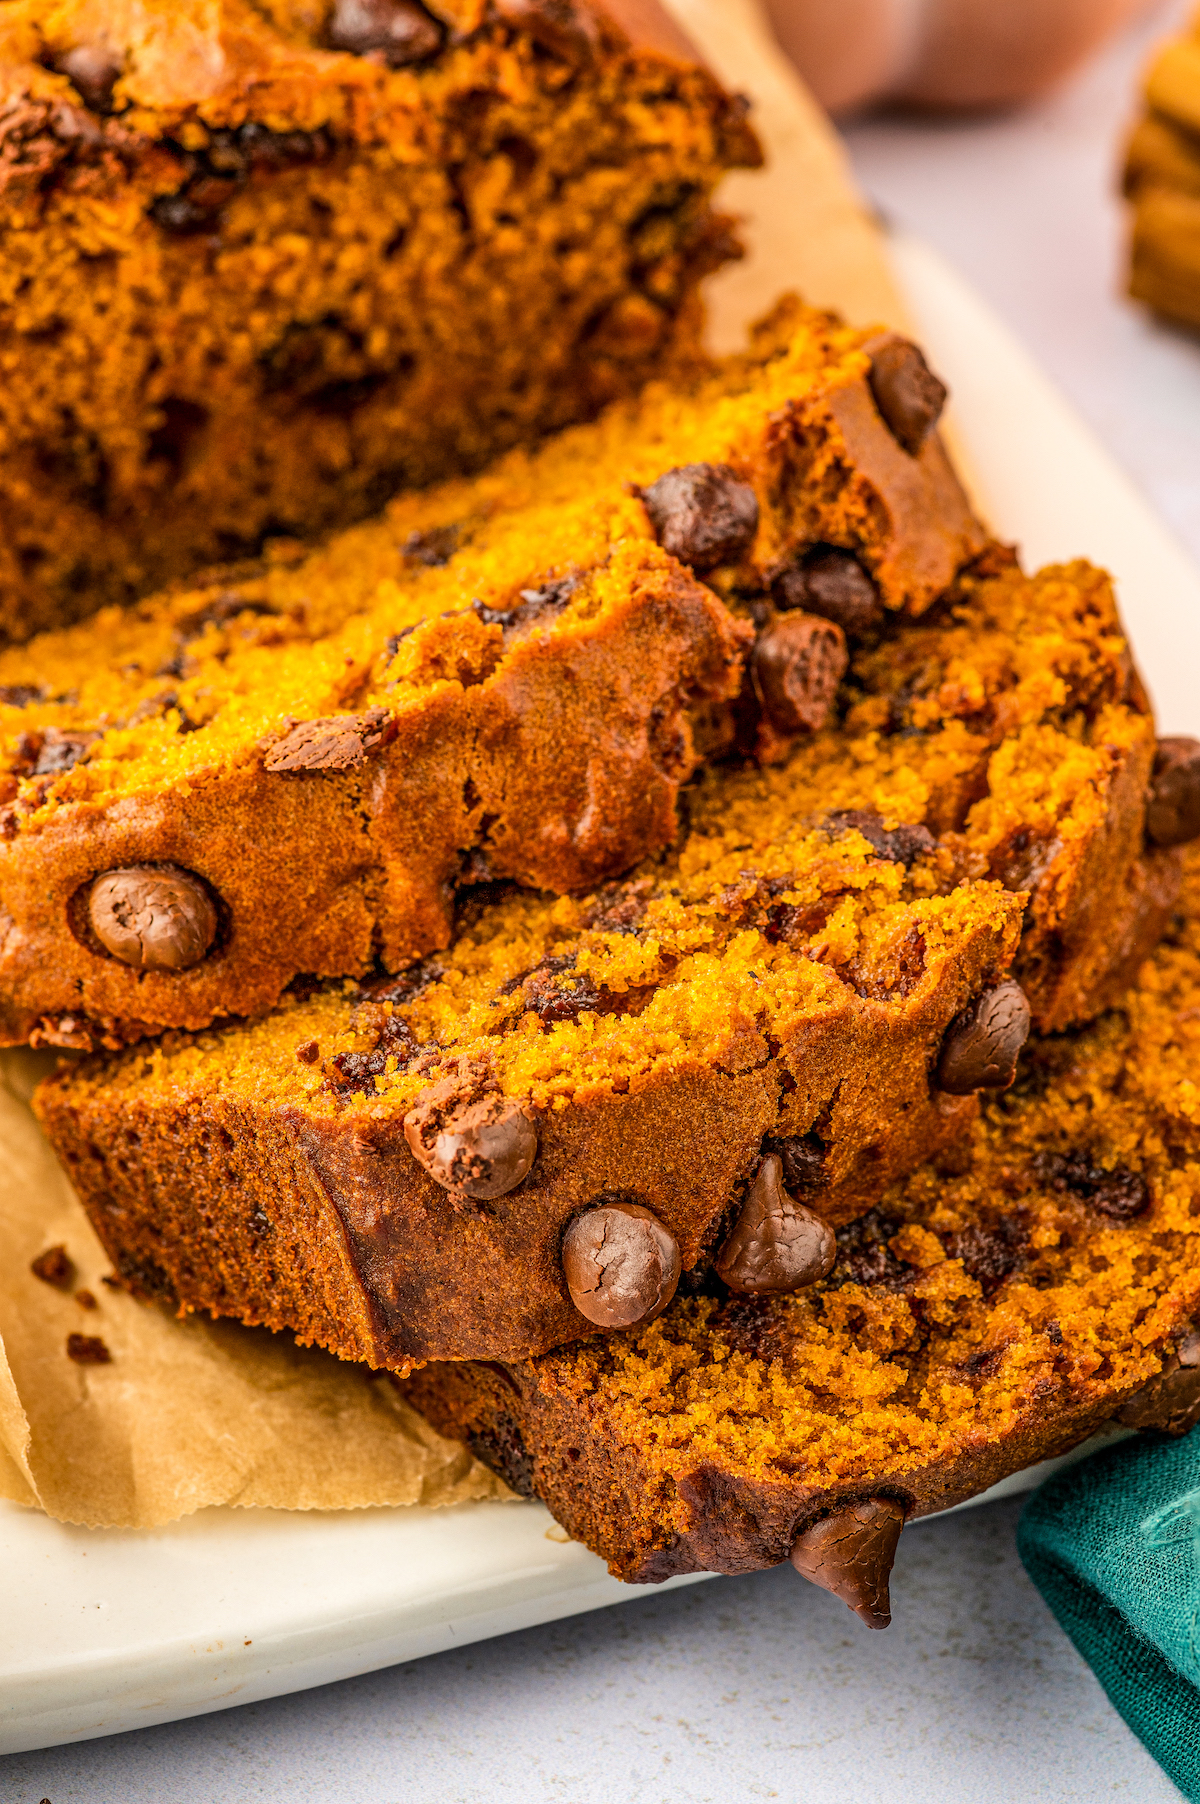 Sweet pumpkin bread with chocolate chips, cut into thick slices.